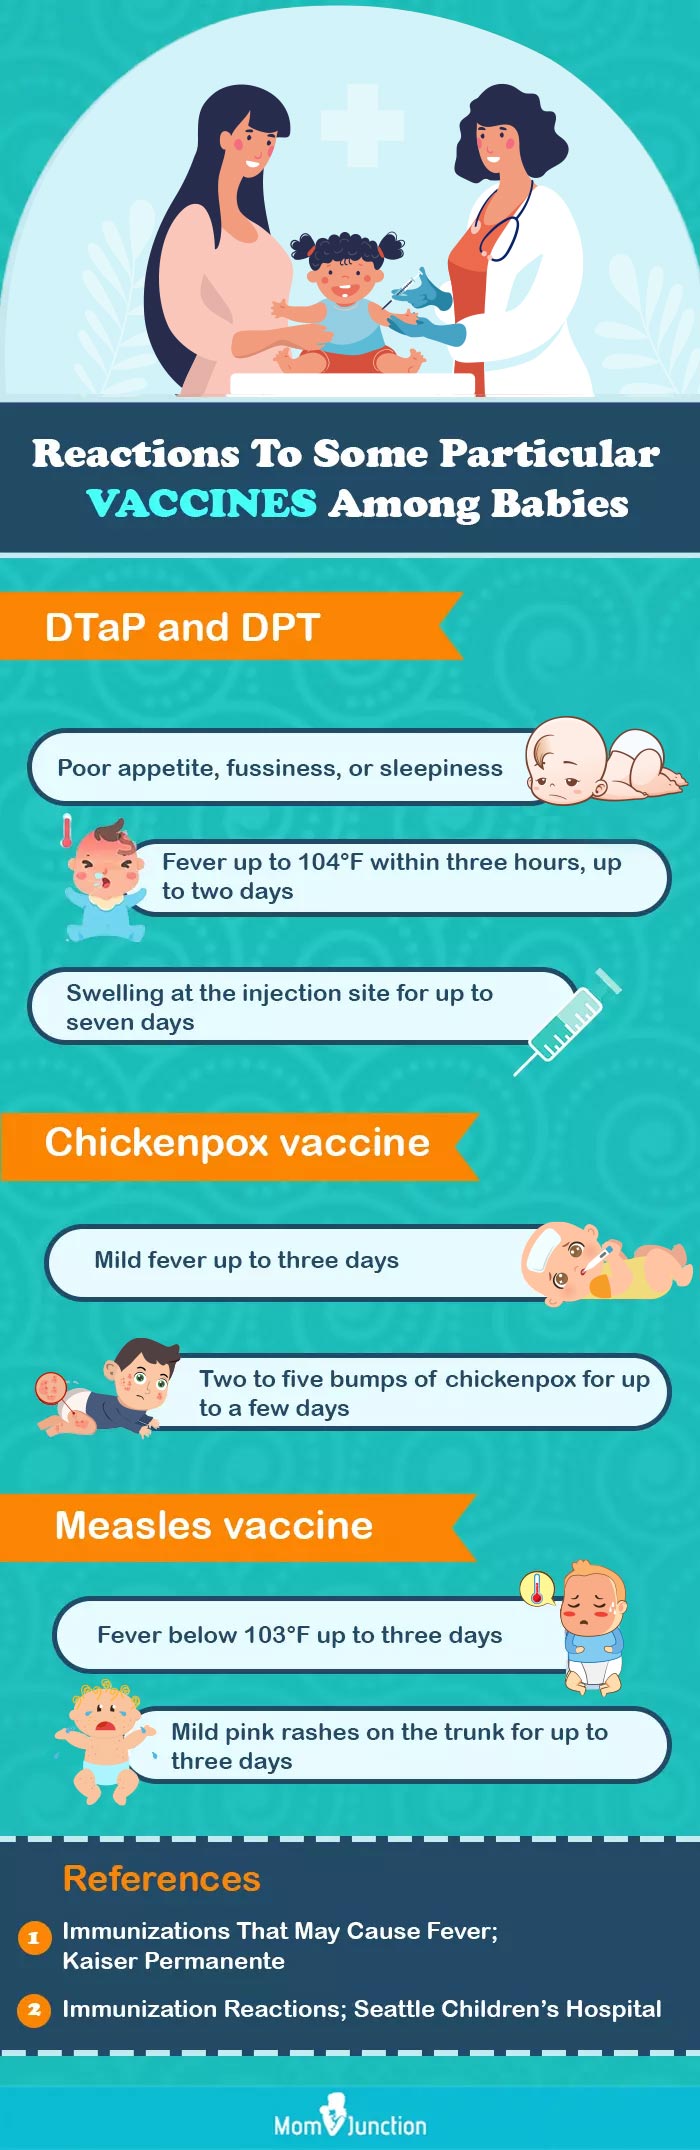 reactions to some particular vaccines among babies (infographic)